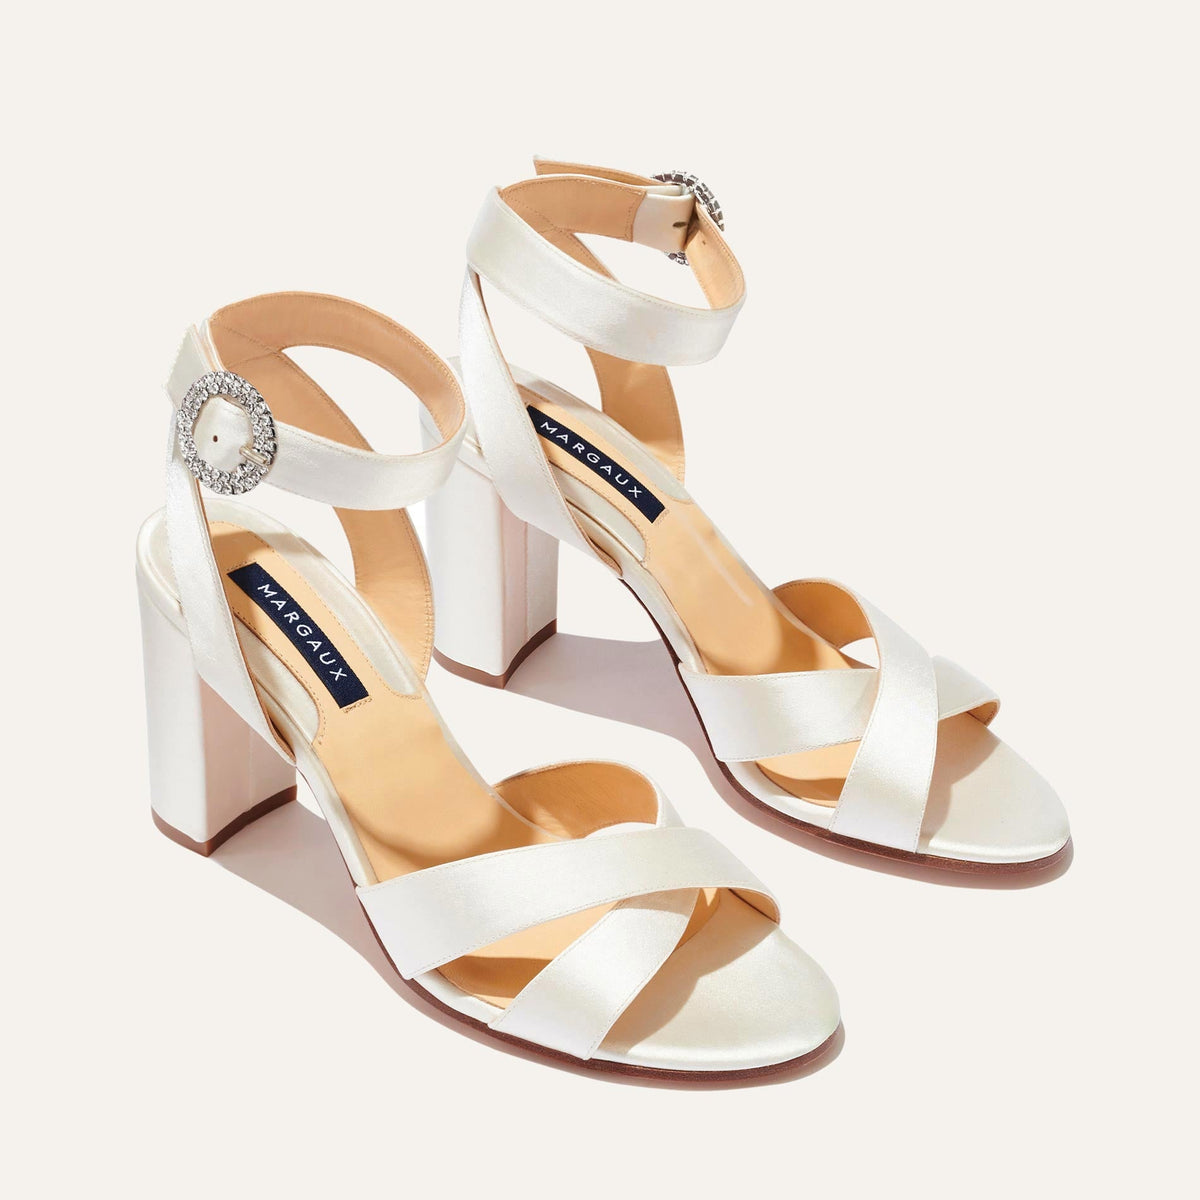 The Uptown Sandal in Ivory Satin